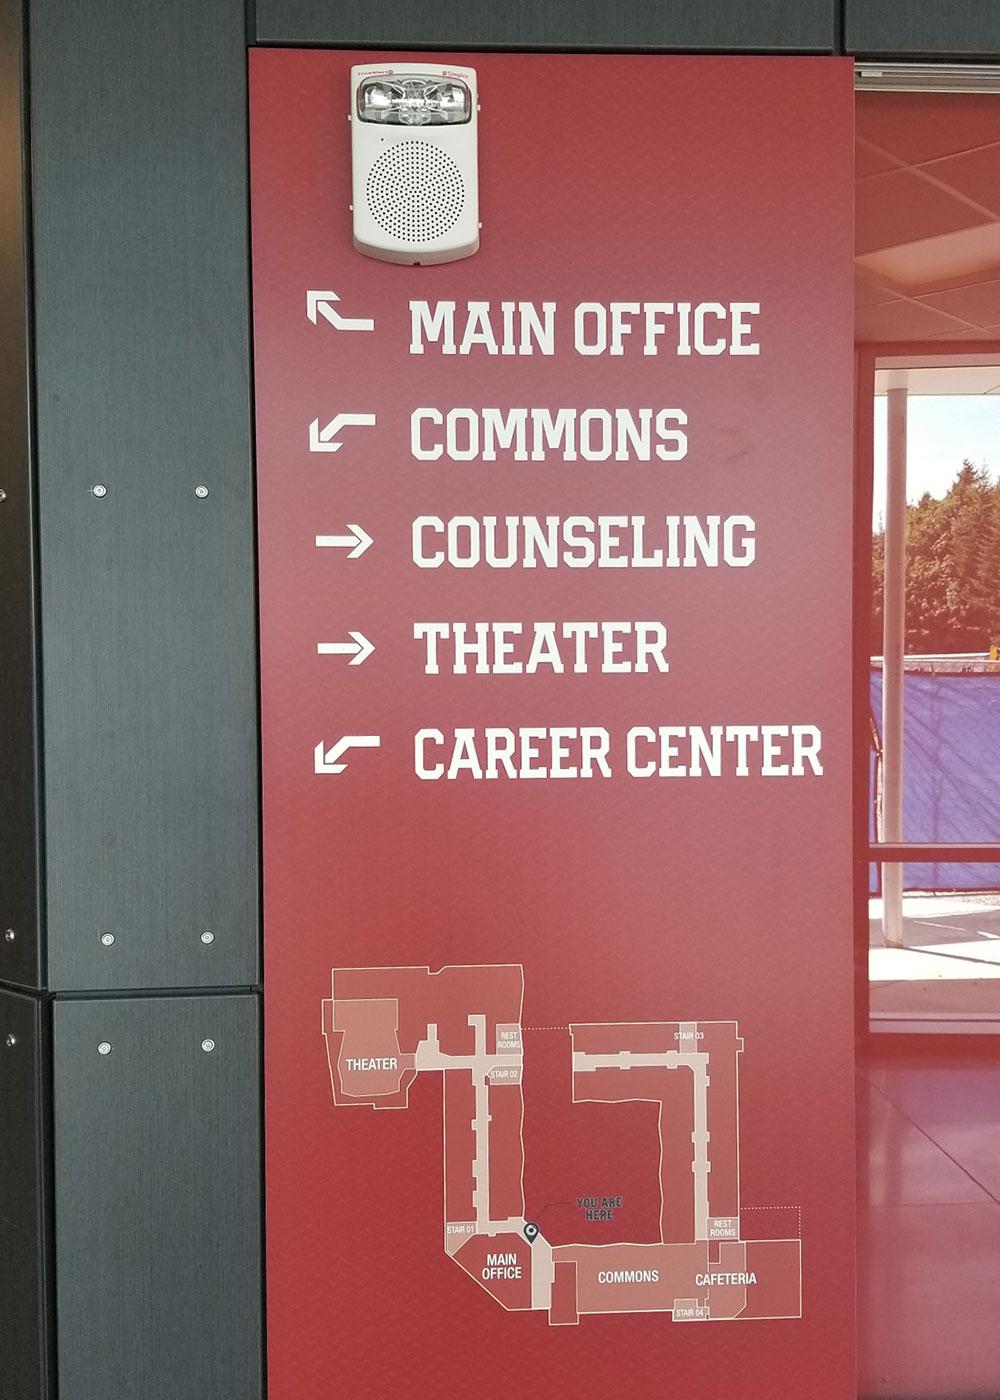 The Juanita High School sign package features a diverse range of interior signage needs - from dimensional to ADA/regulatory to flat panel wayfinding.